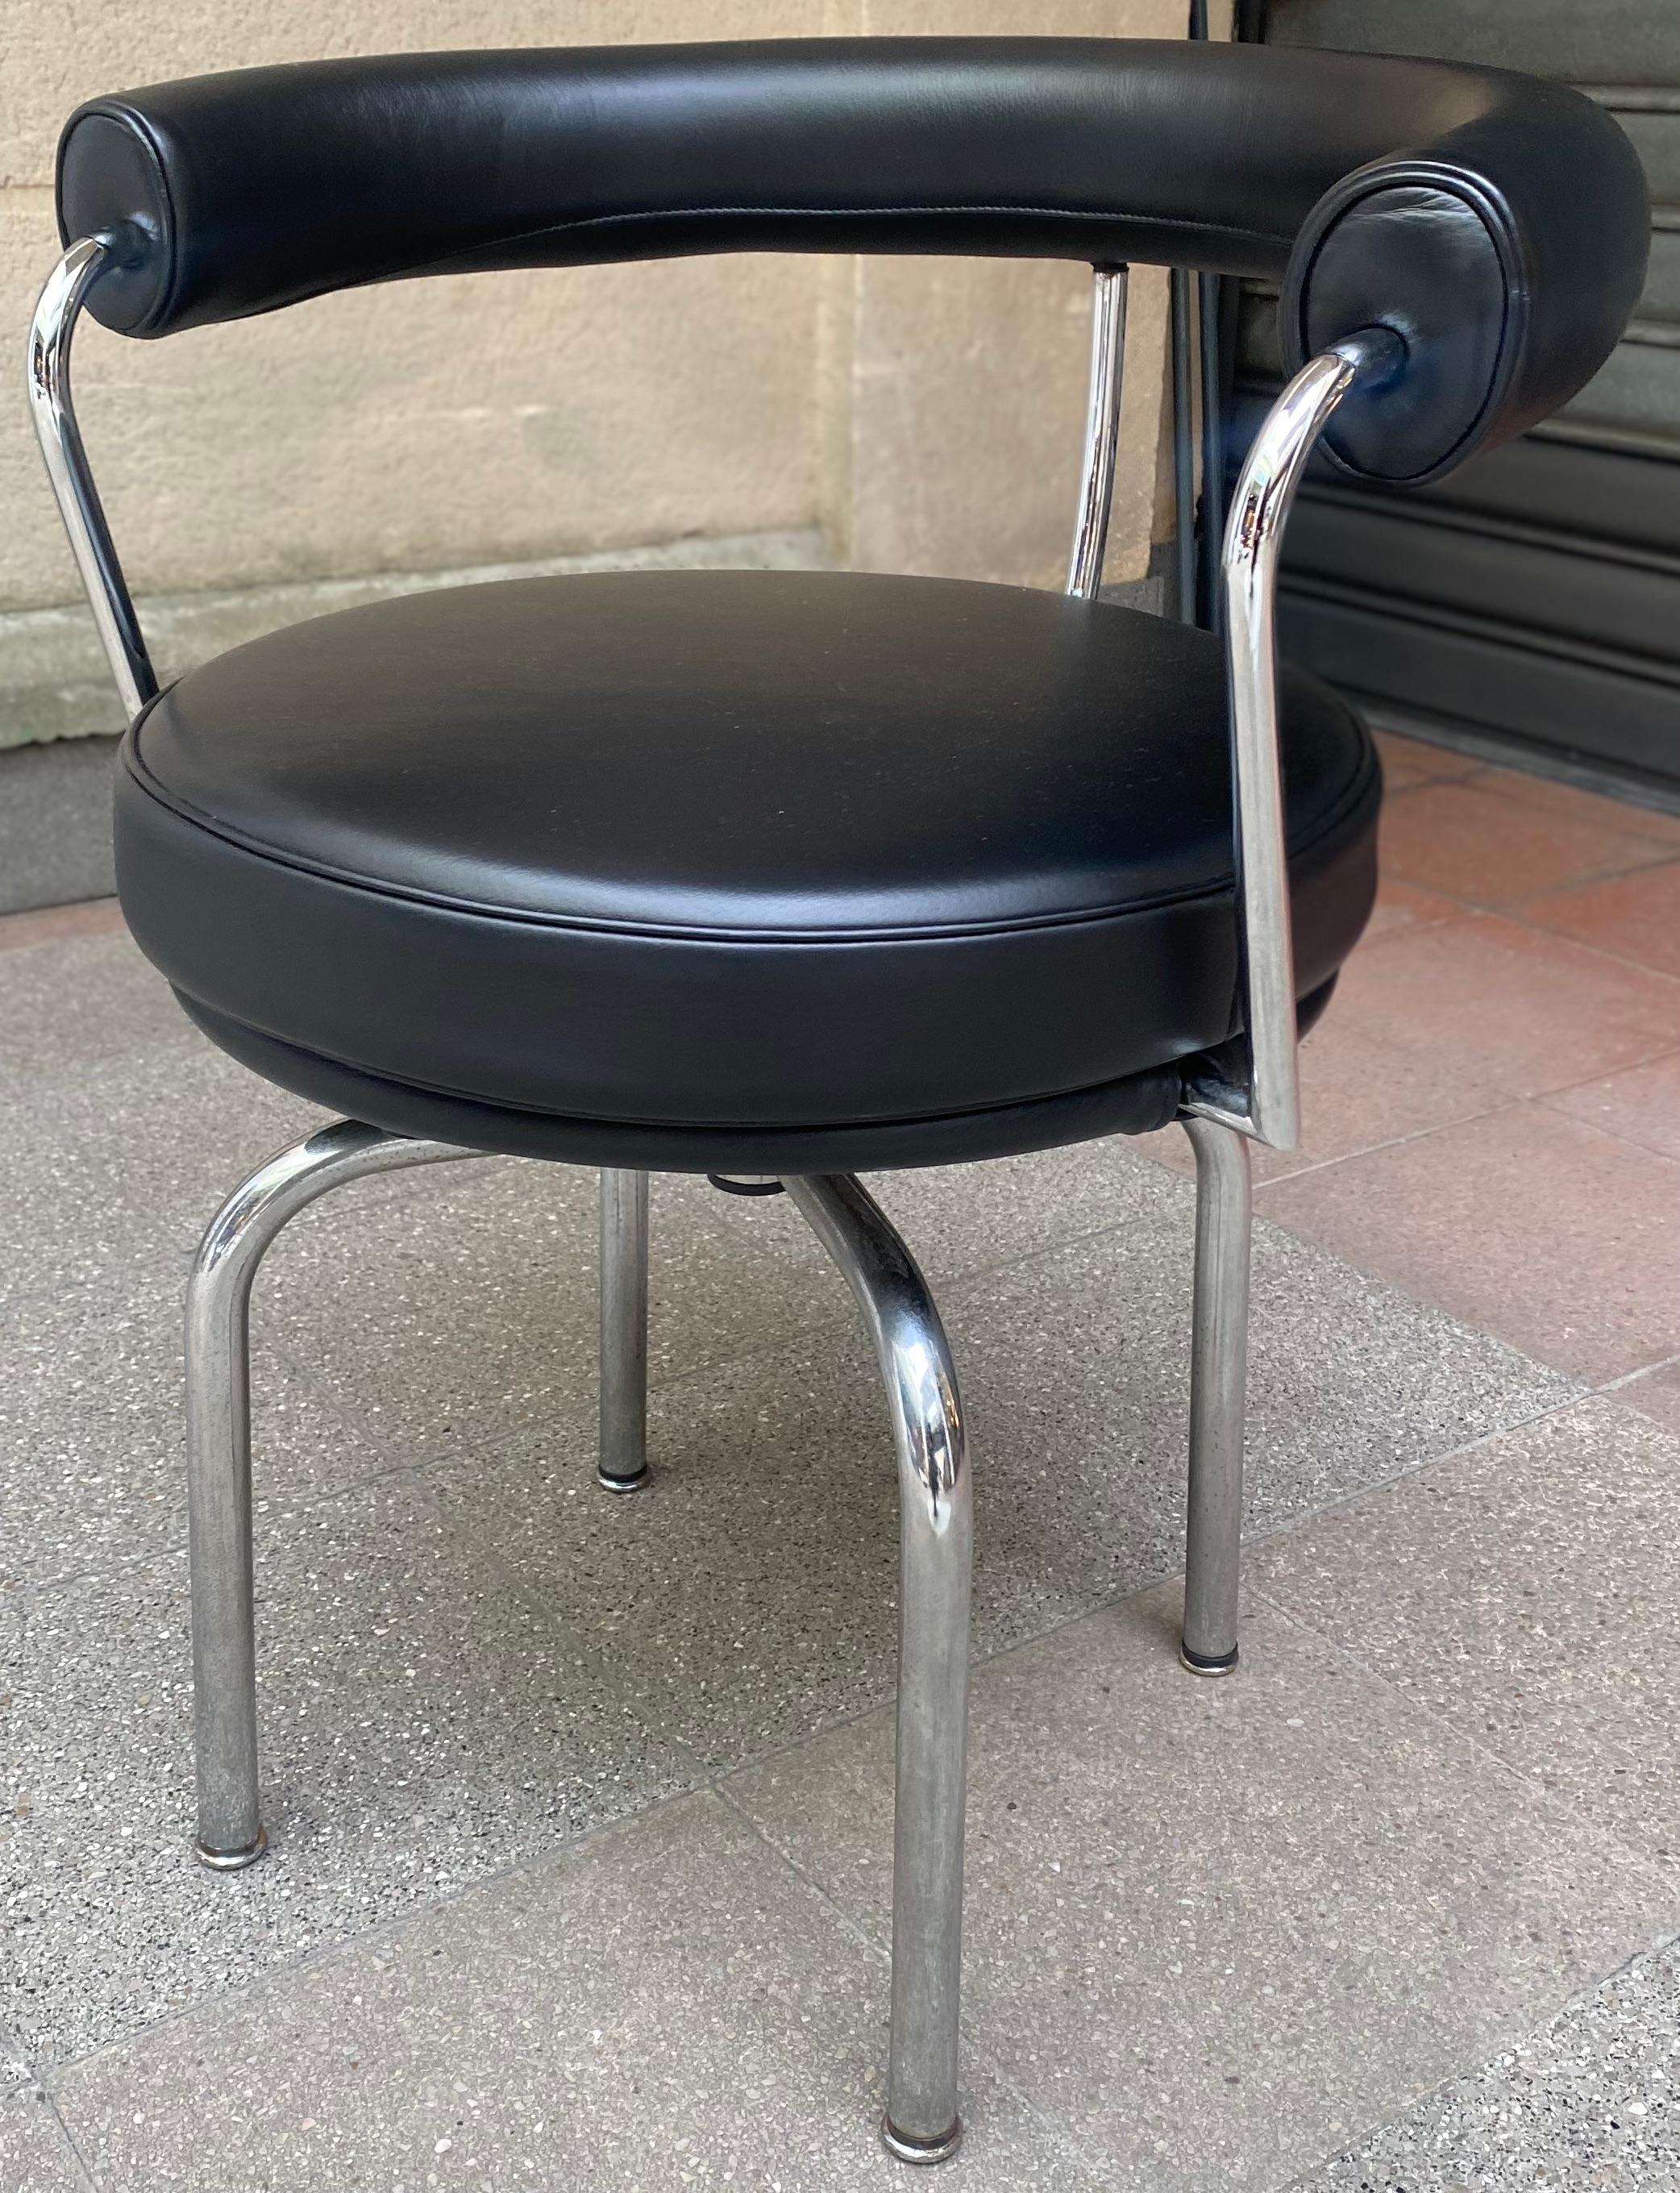 LC7 black swivel chair.
Cassina edition.
circa 2000.
Leather and chrome steel.
Measures: h 72 cm x L 61 x W 57.
Ø 57 cm.
Attribution mark on the foot of the chair.

The LC7 swivel chair was designed by Charlotte Perriand in 1927 for her flat